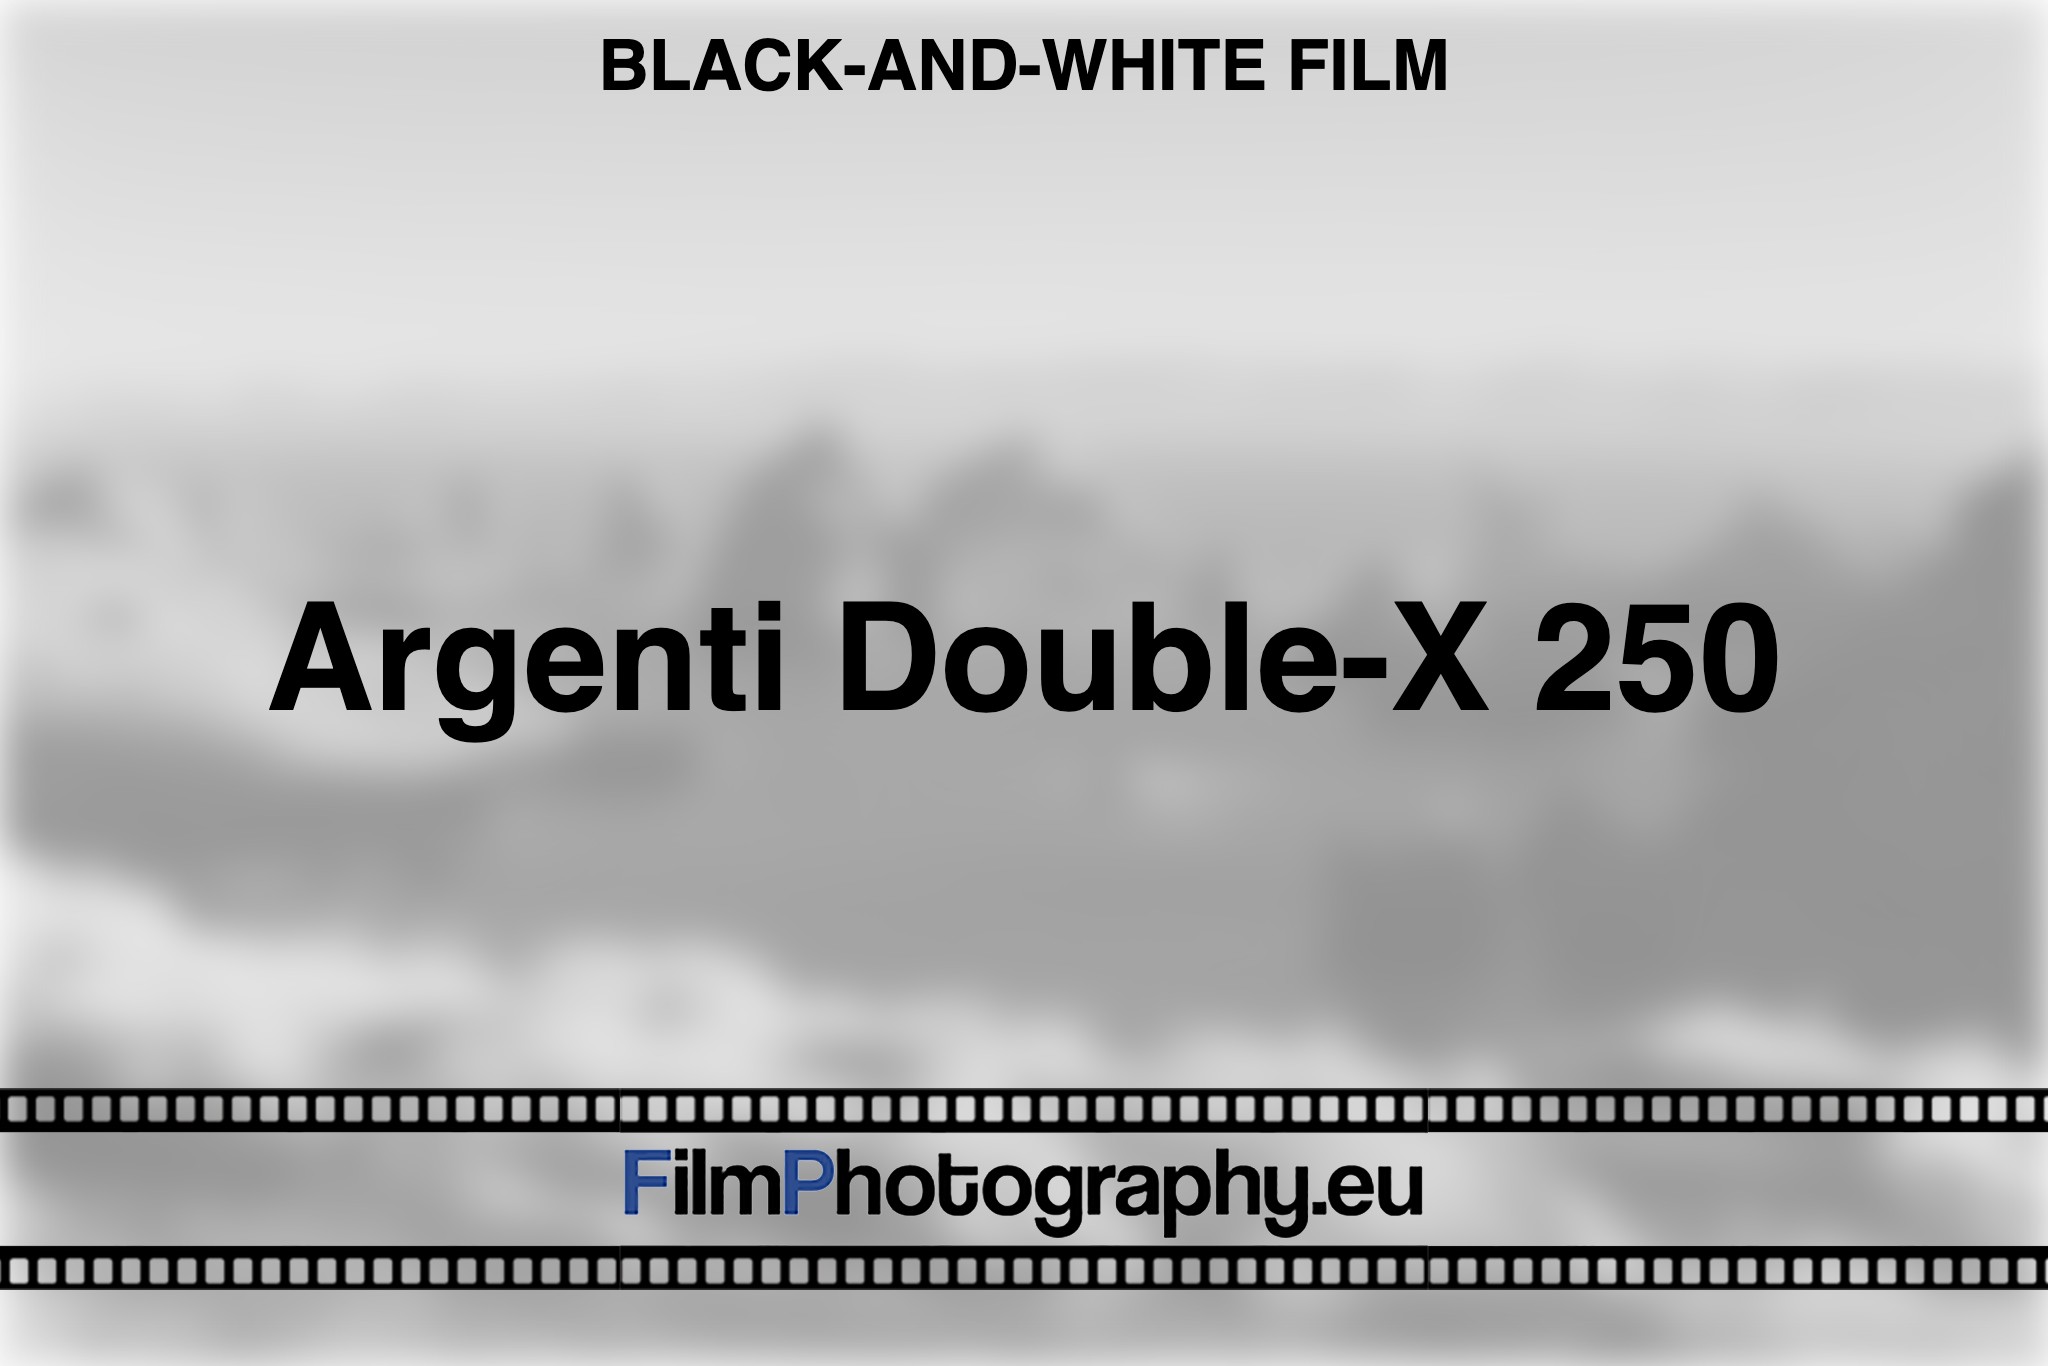 argenti-double-x-250-black-and-white-film-bnv